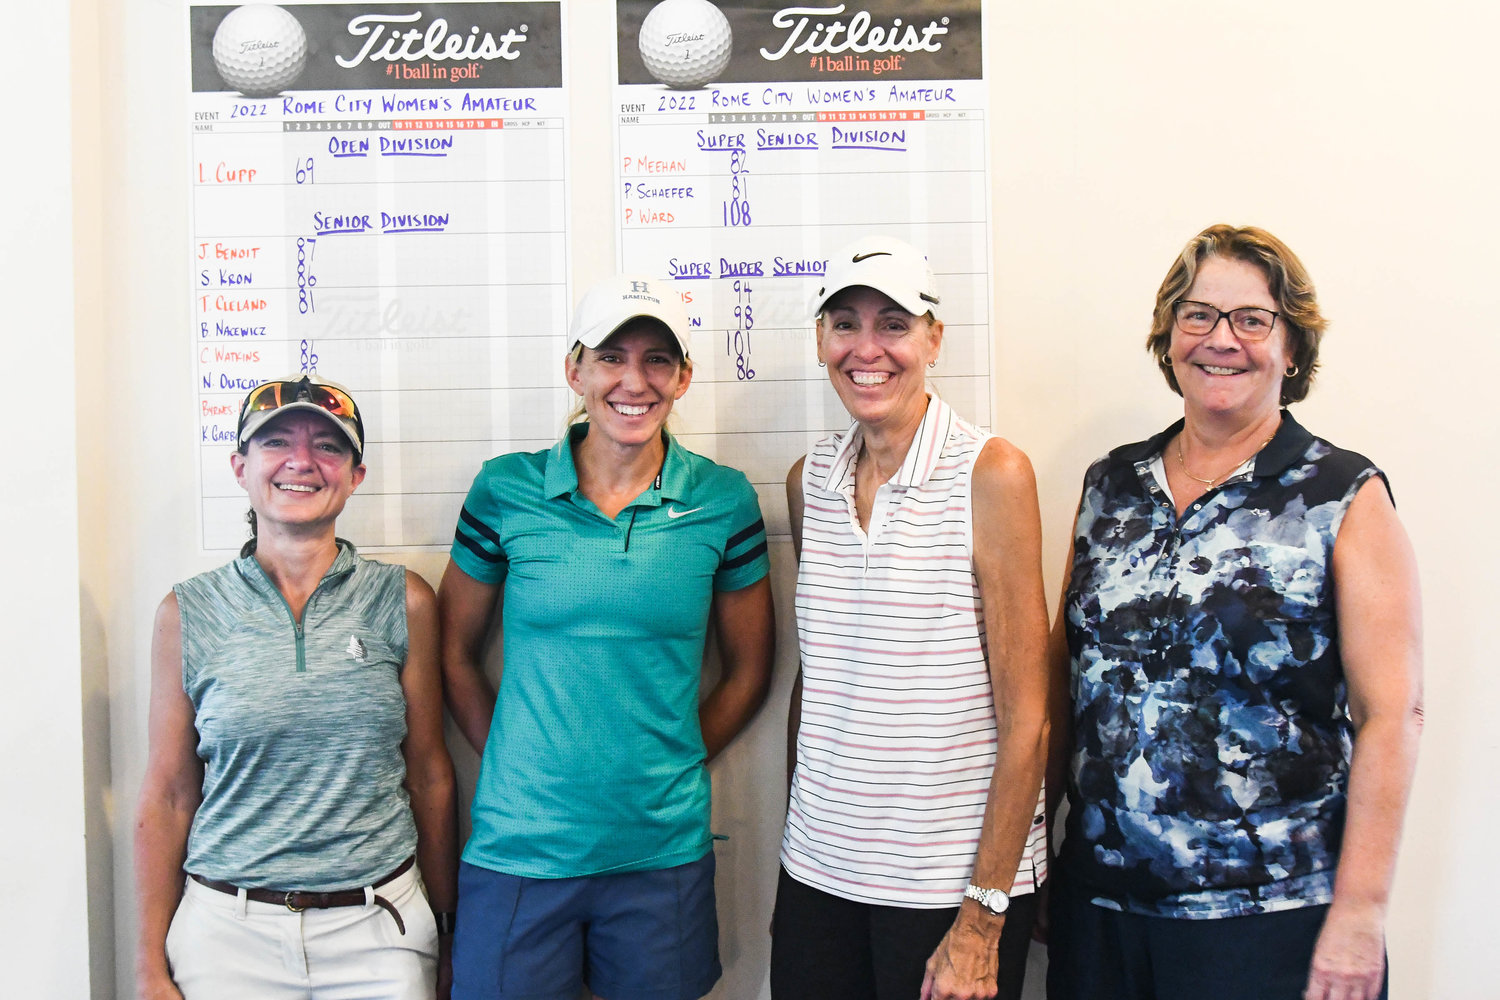 There were 16 participants in the 53rd Rome City Women’s Amateur Golf Championship Monday at Rome Country Club. They included, from left: Kathy Garbooshian, Lauren Cupp, Teresa Cleland and Carina Watkins. Cupp led the field with a 69. Cleland had the top score in the senior division, an 81.